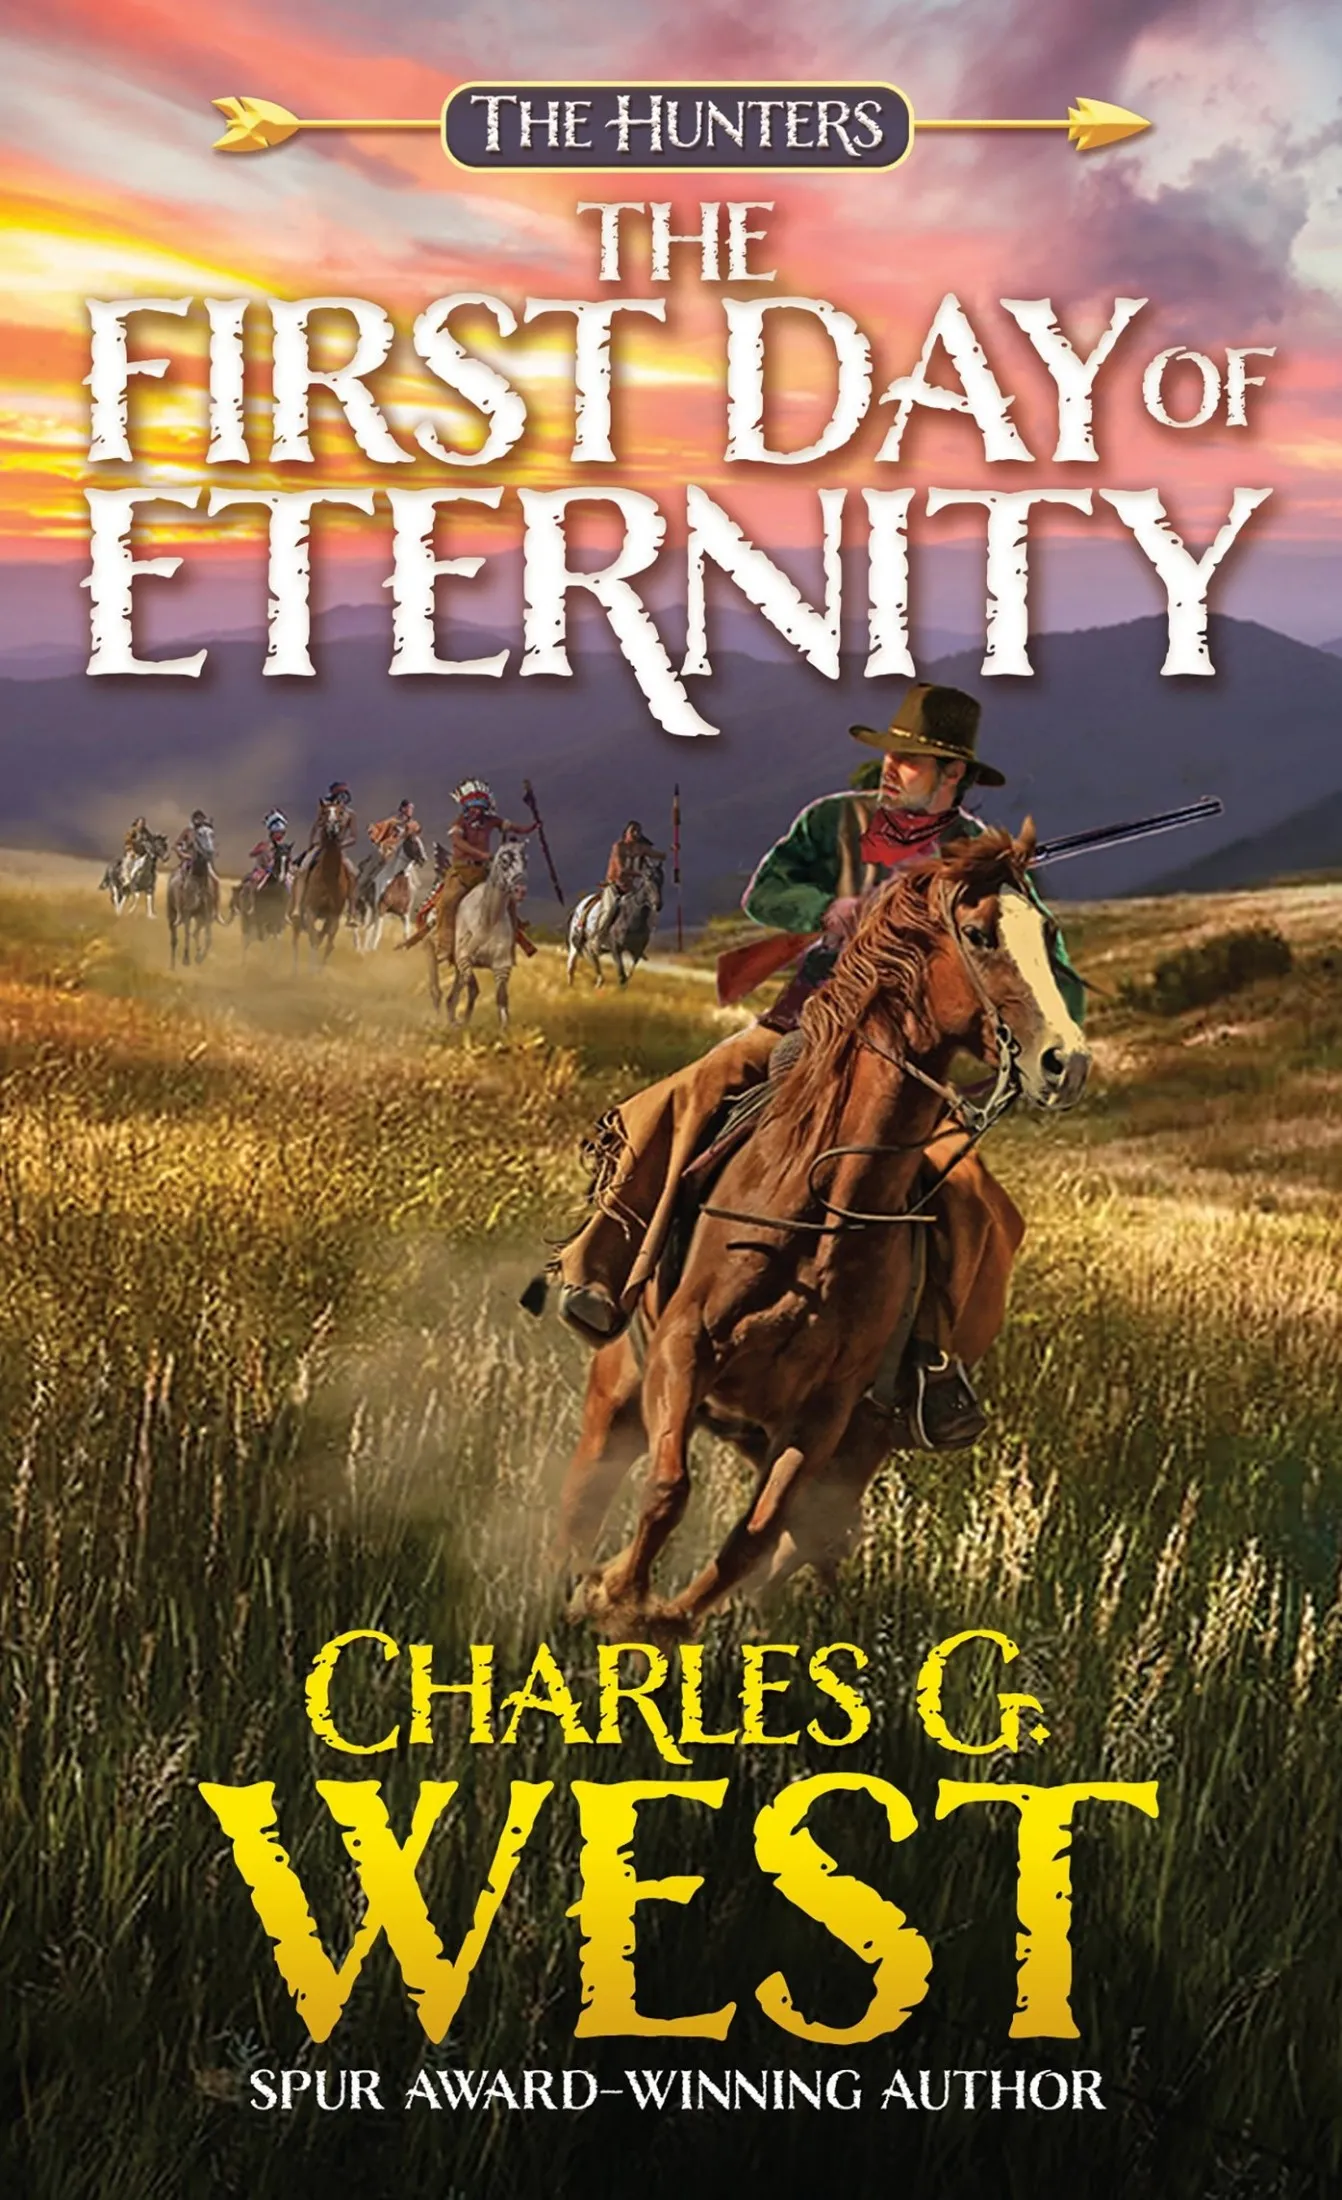 The First Day of Eternity (The Hunters #2)